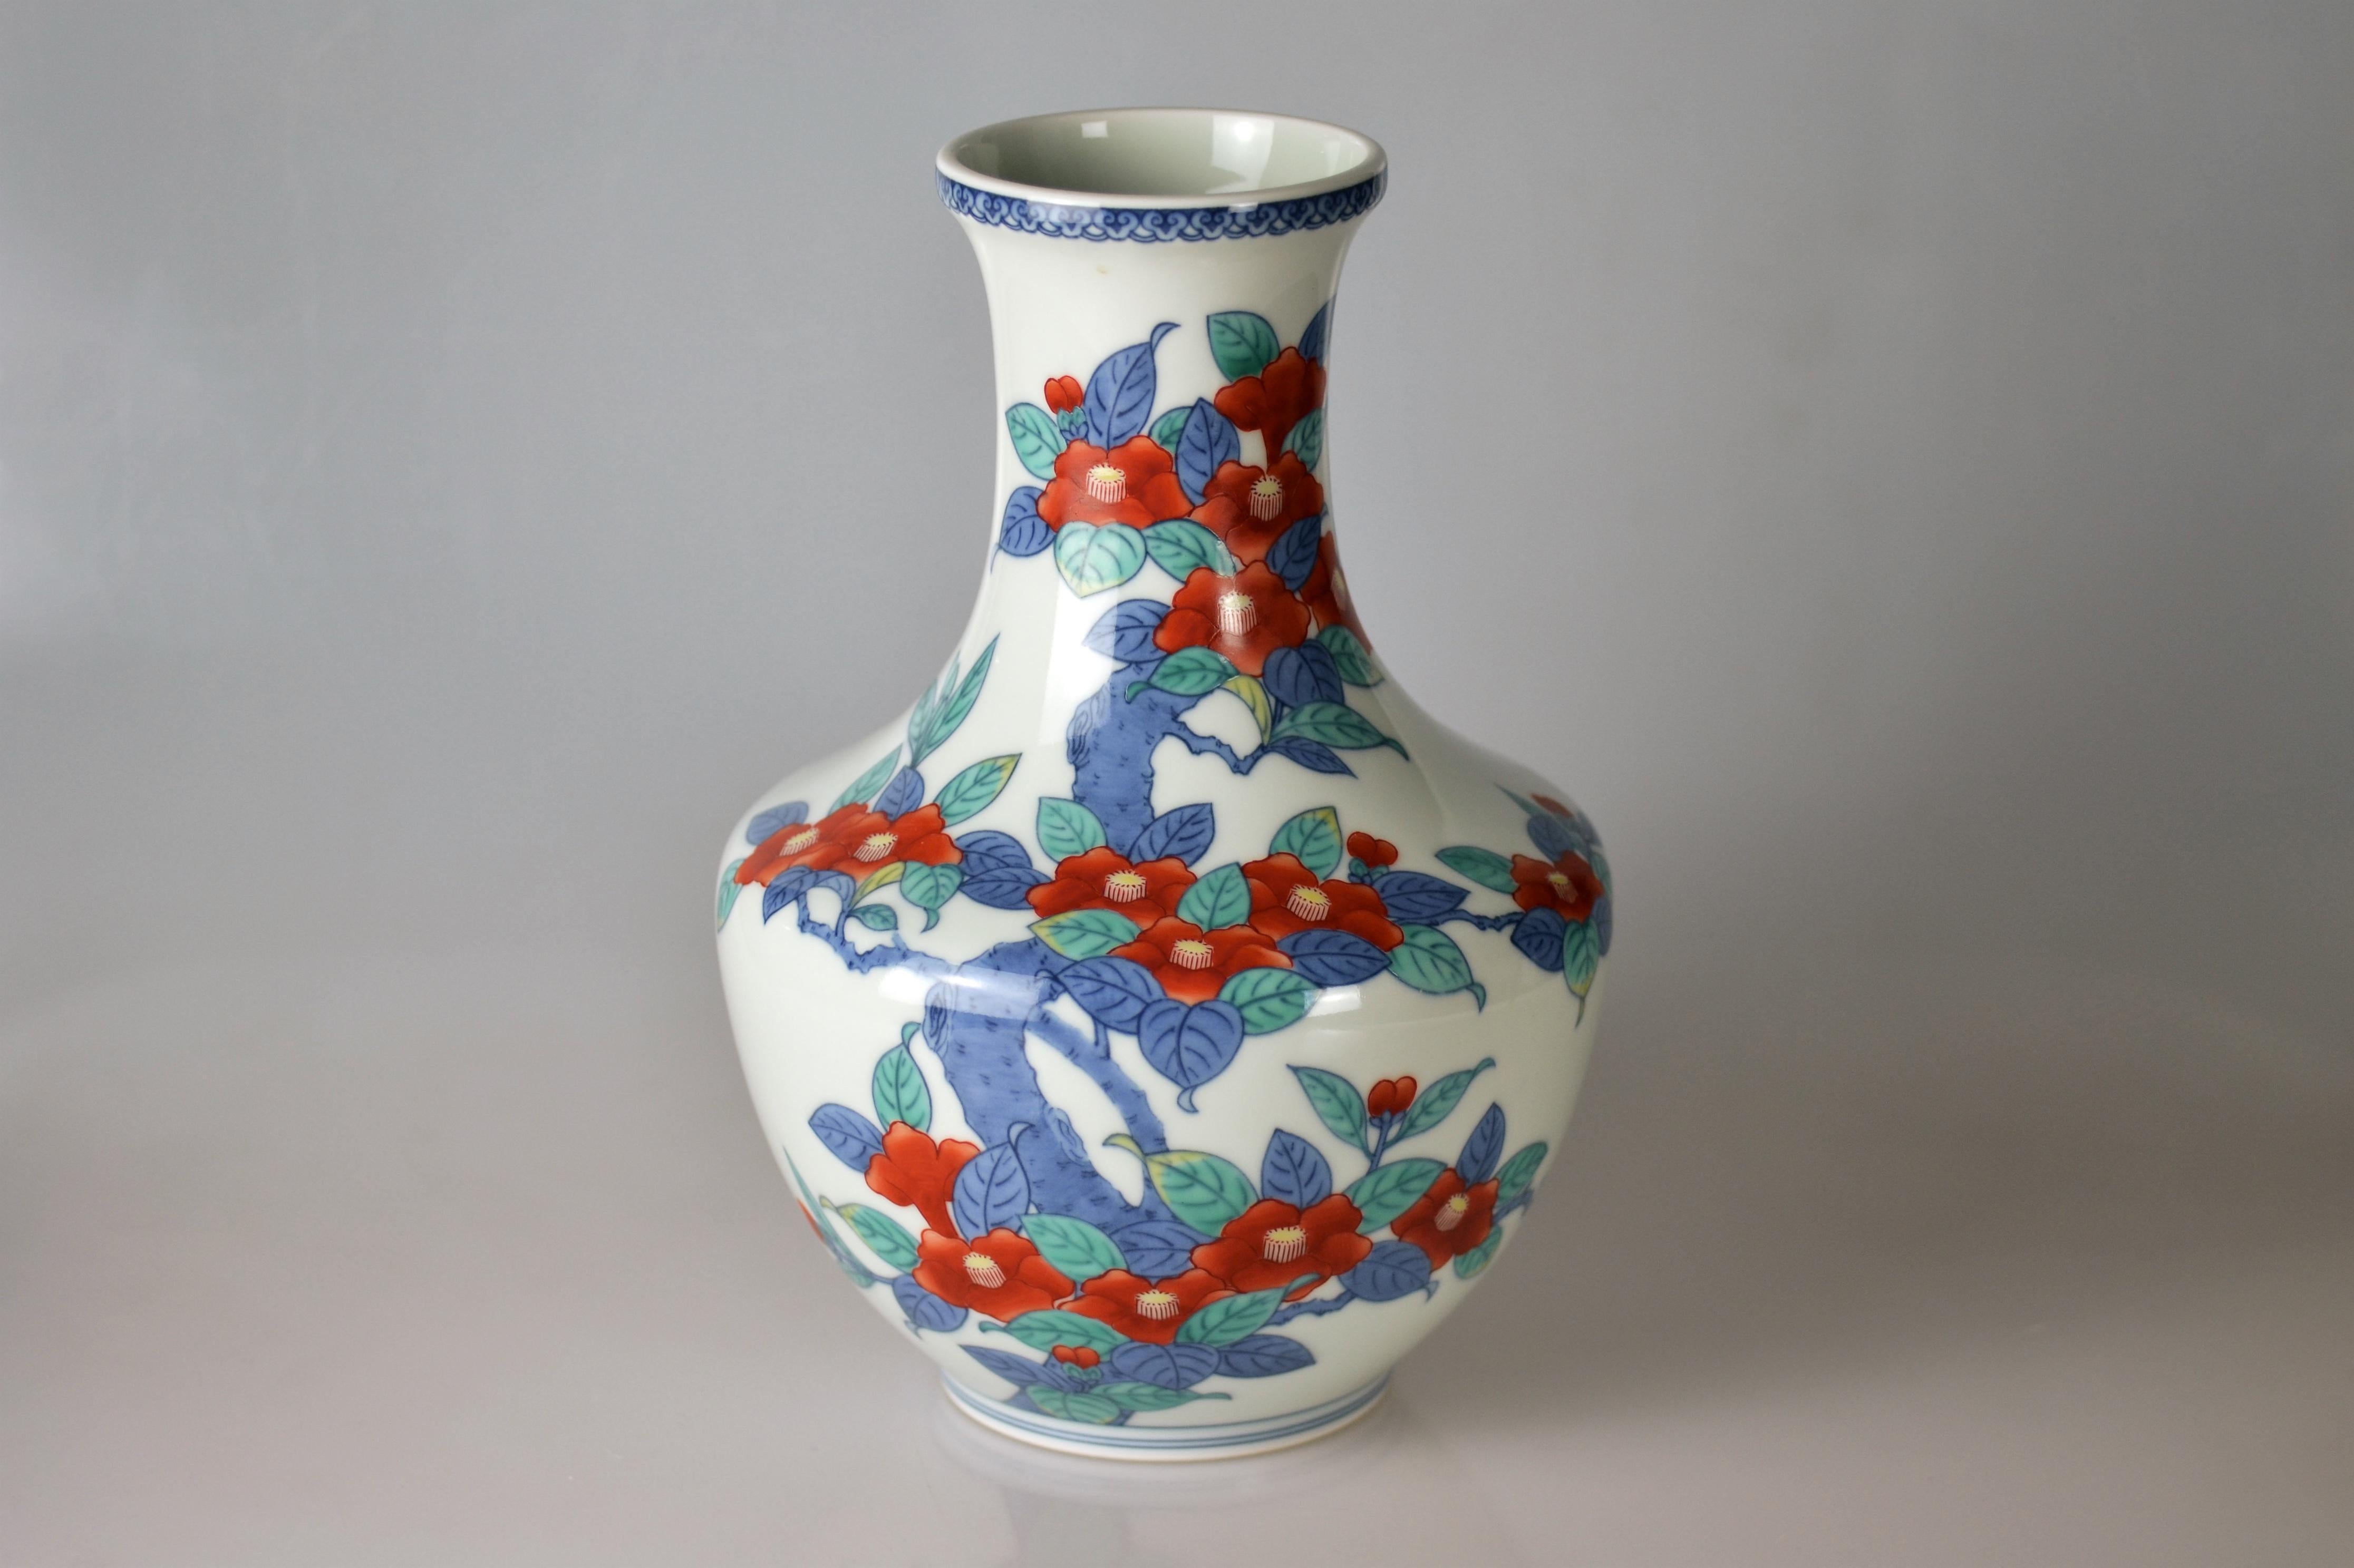 Painted Porcelain Flower Vase by Living National Treasure Imaizumi Imaemon XIII For Sale